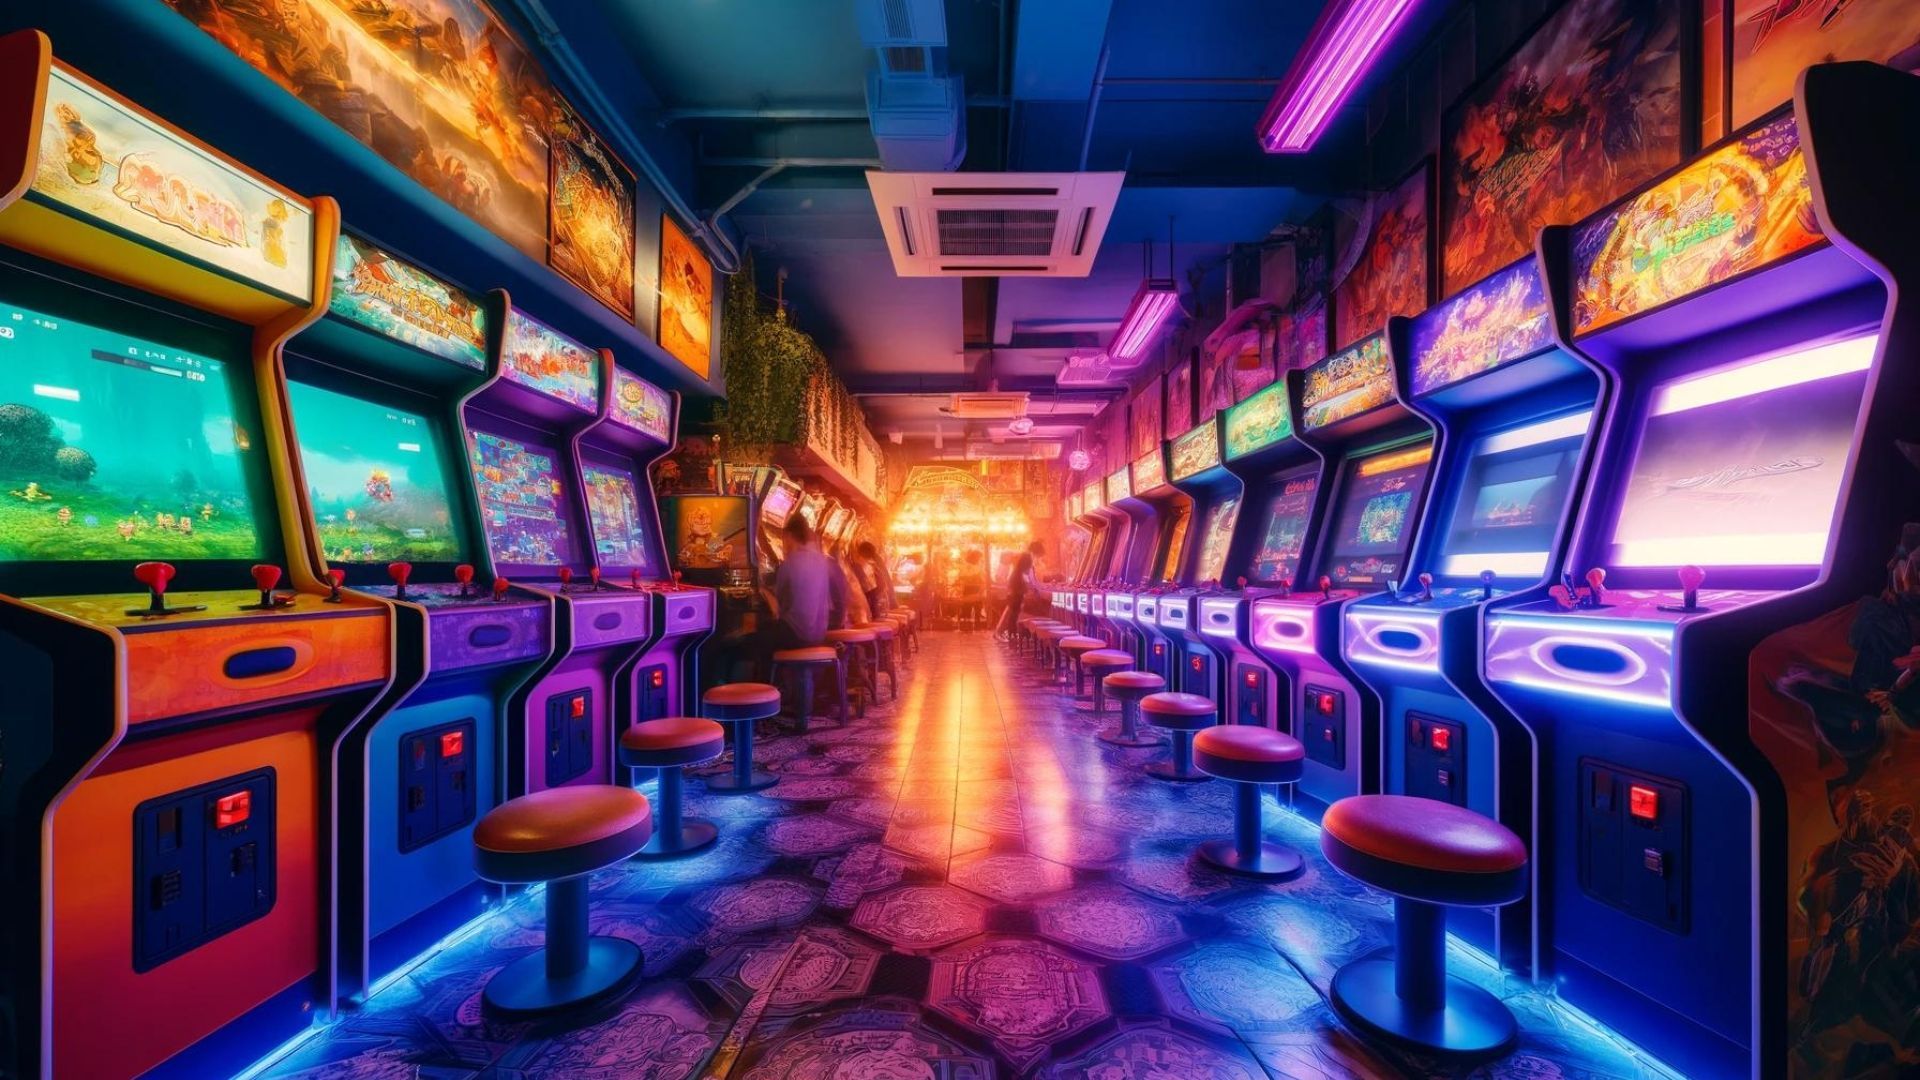 Toughened glass, tinted glass, smart glass – what's it all about? Discover the right type for arcade